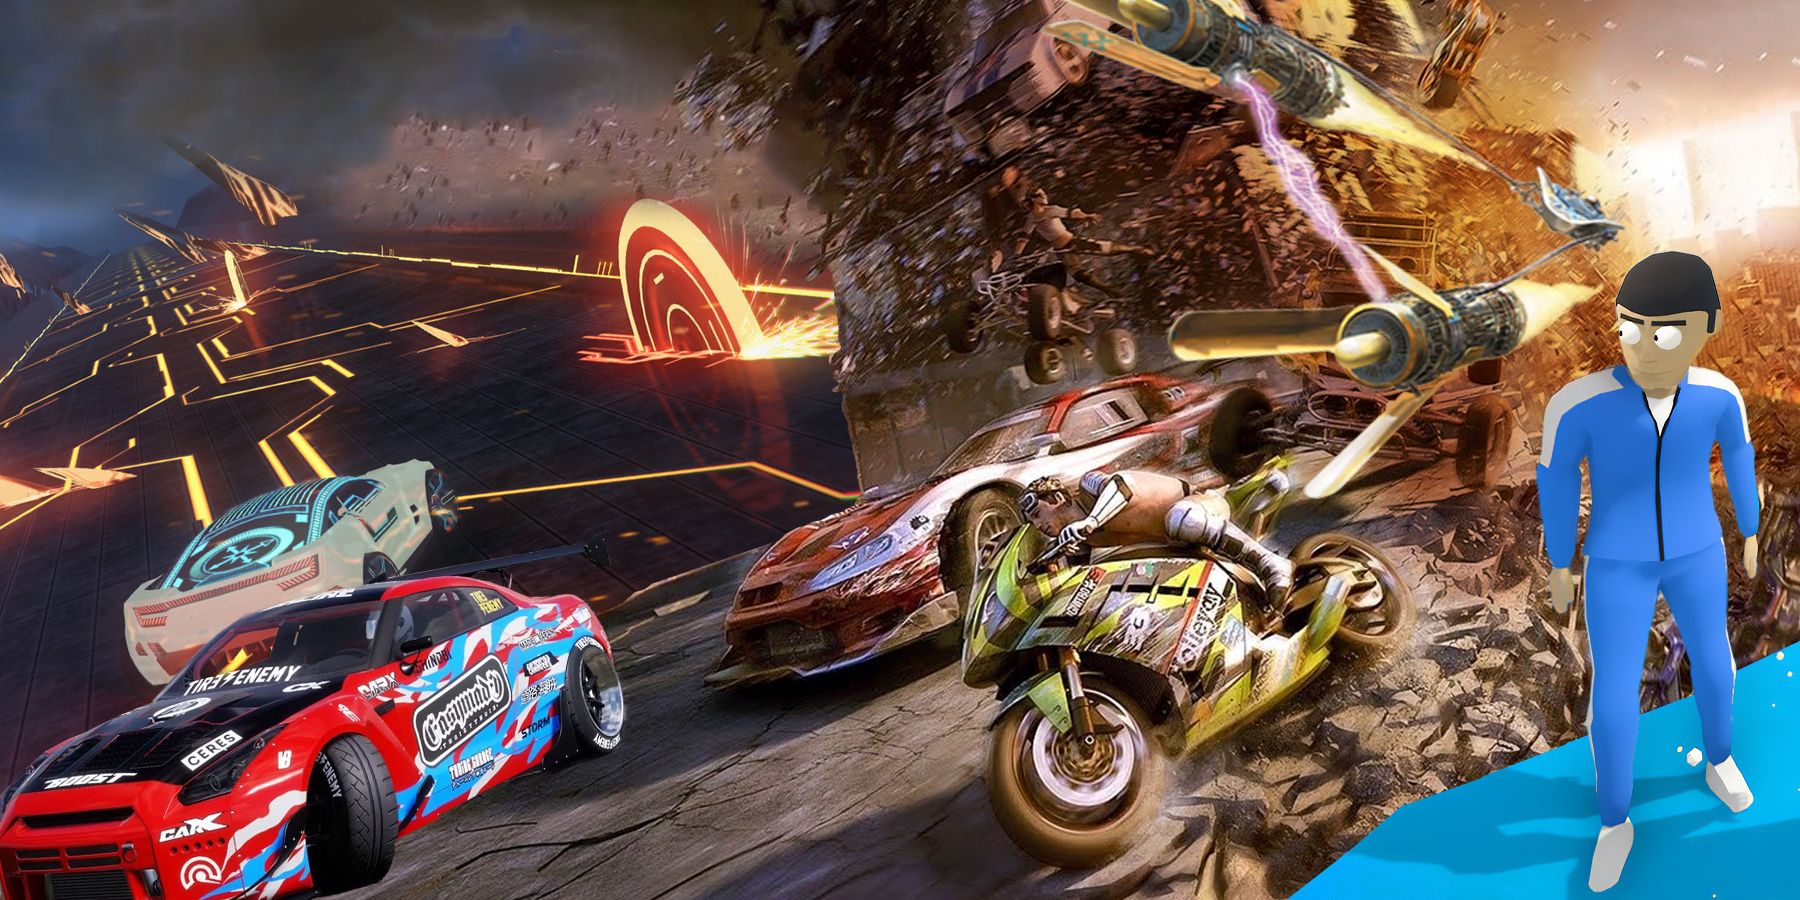 10 Most Iconic Video Game Cars, Ranked